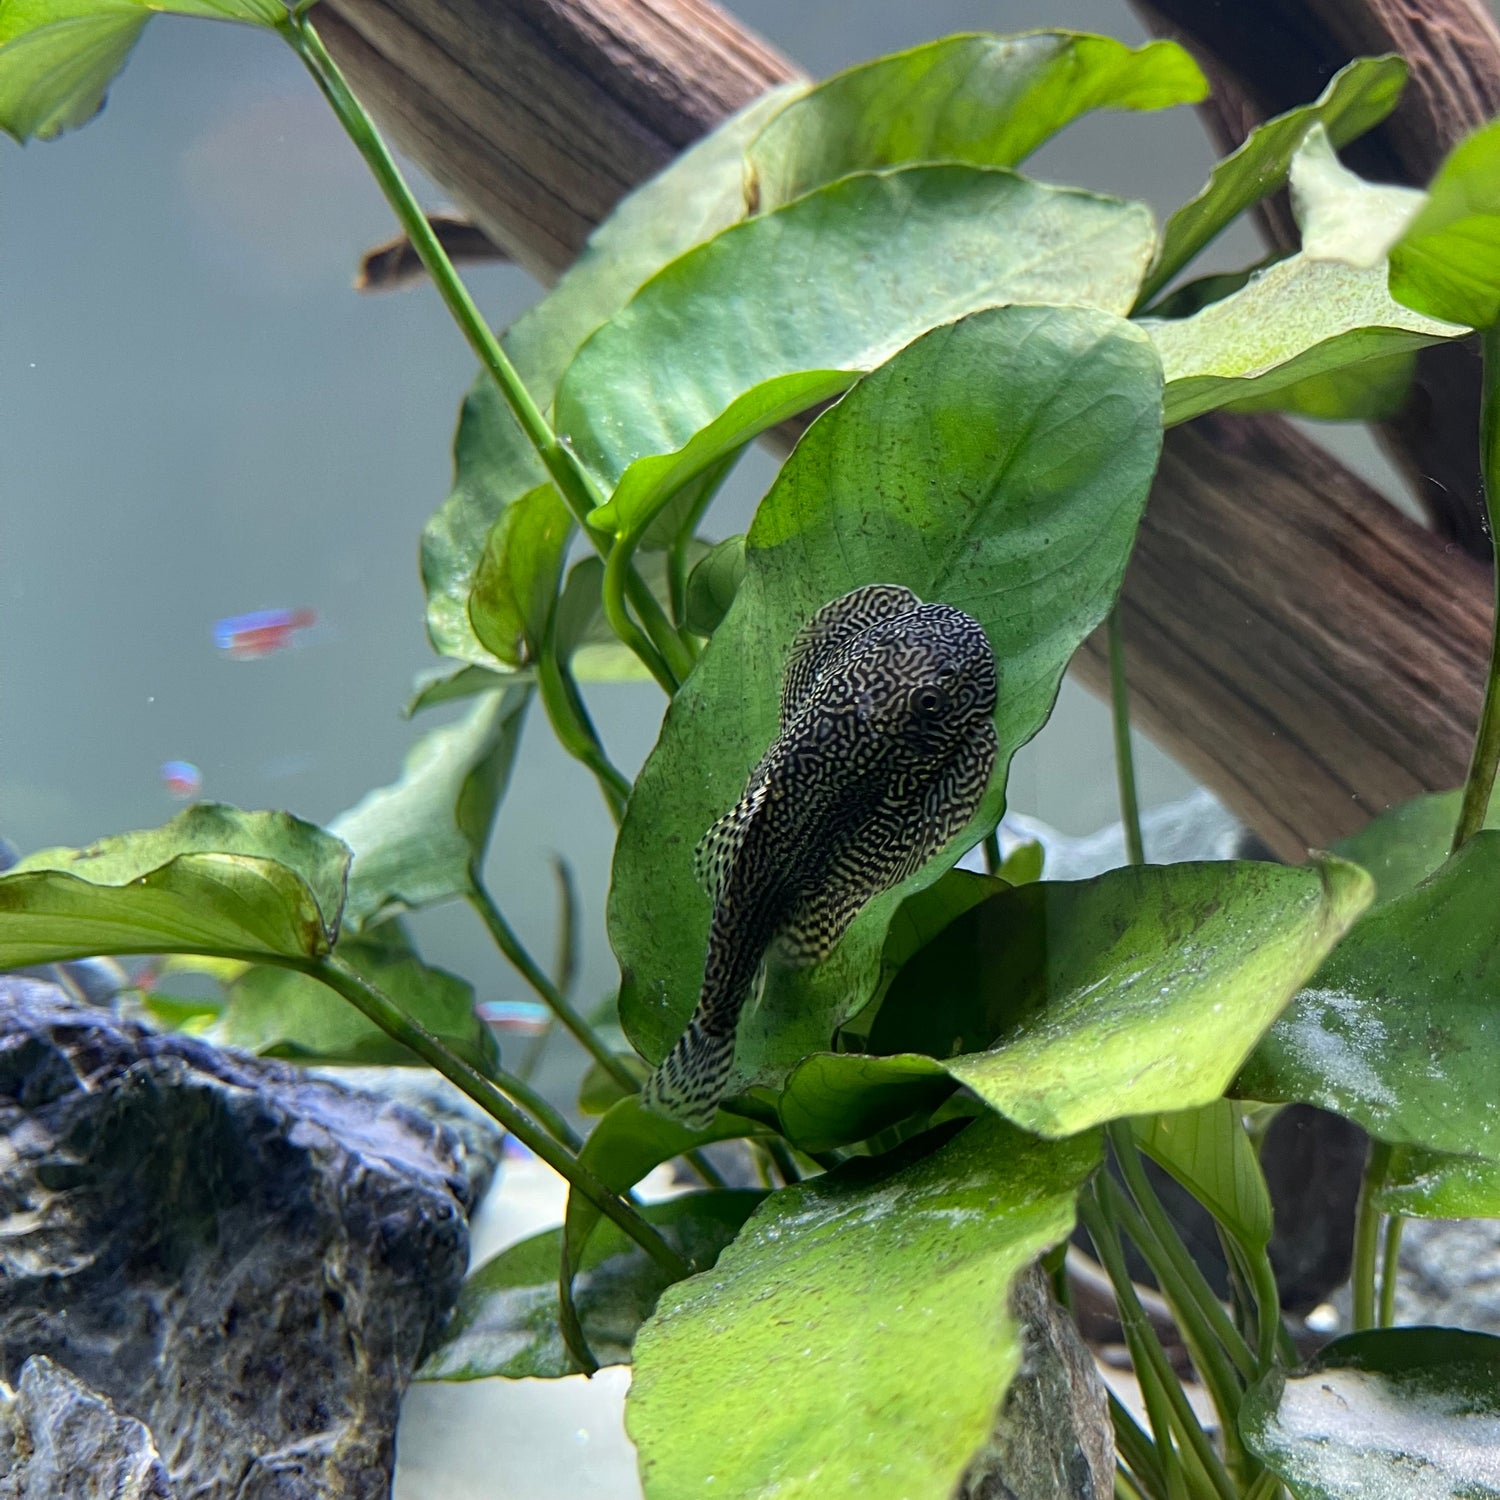 Reticulated Hillstream Loach (Sewellia Lineolata) for sale at aquarium fish depot pictured here swimming in a planted aquarium